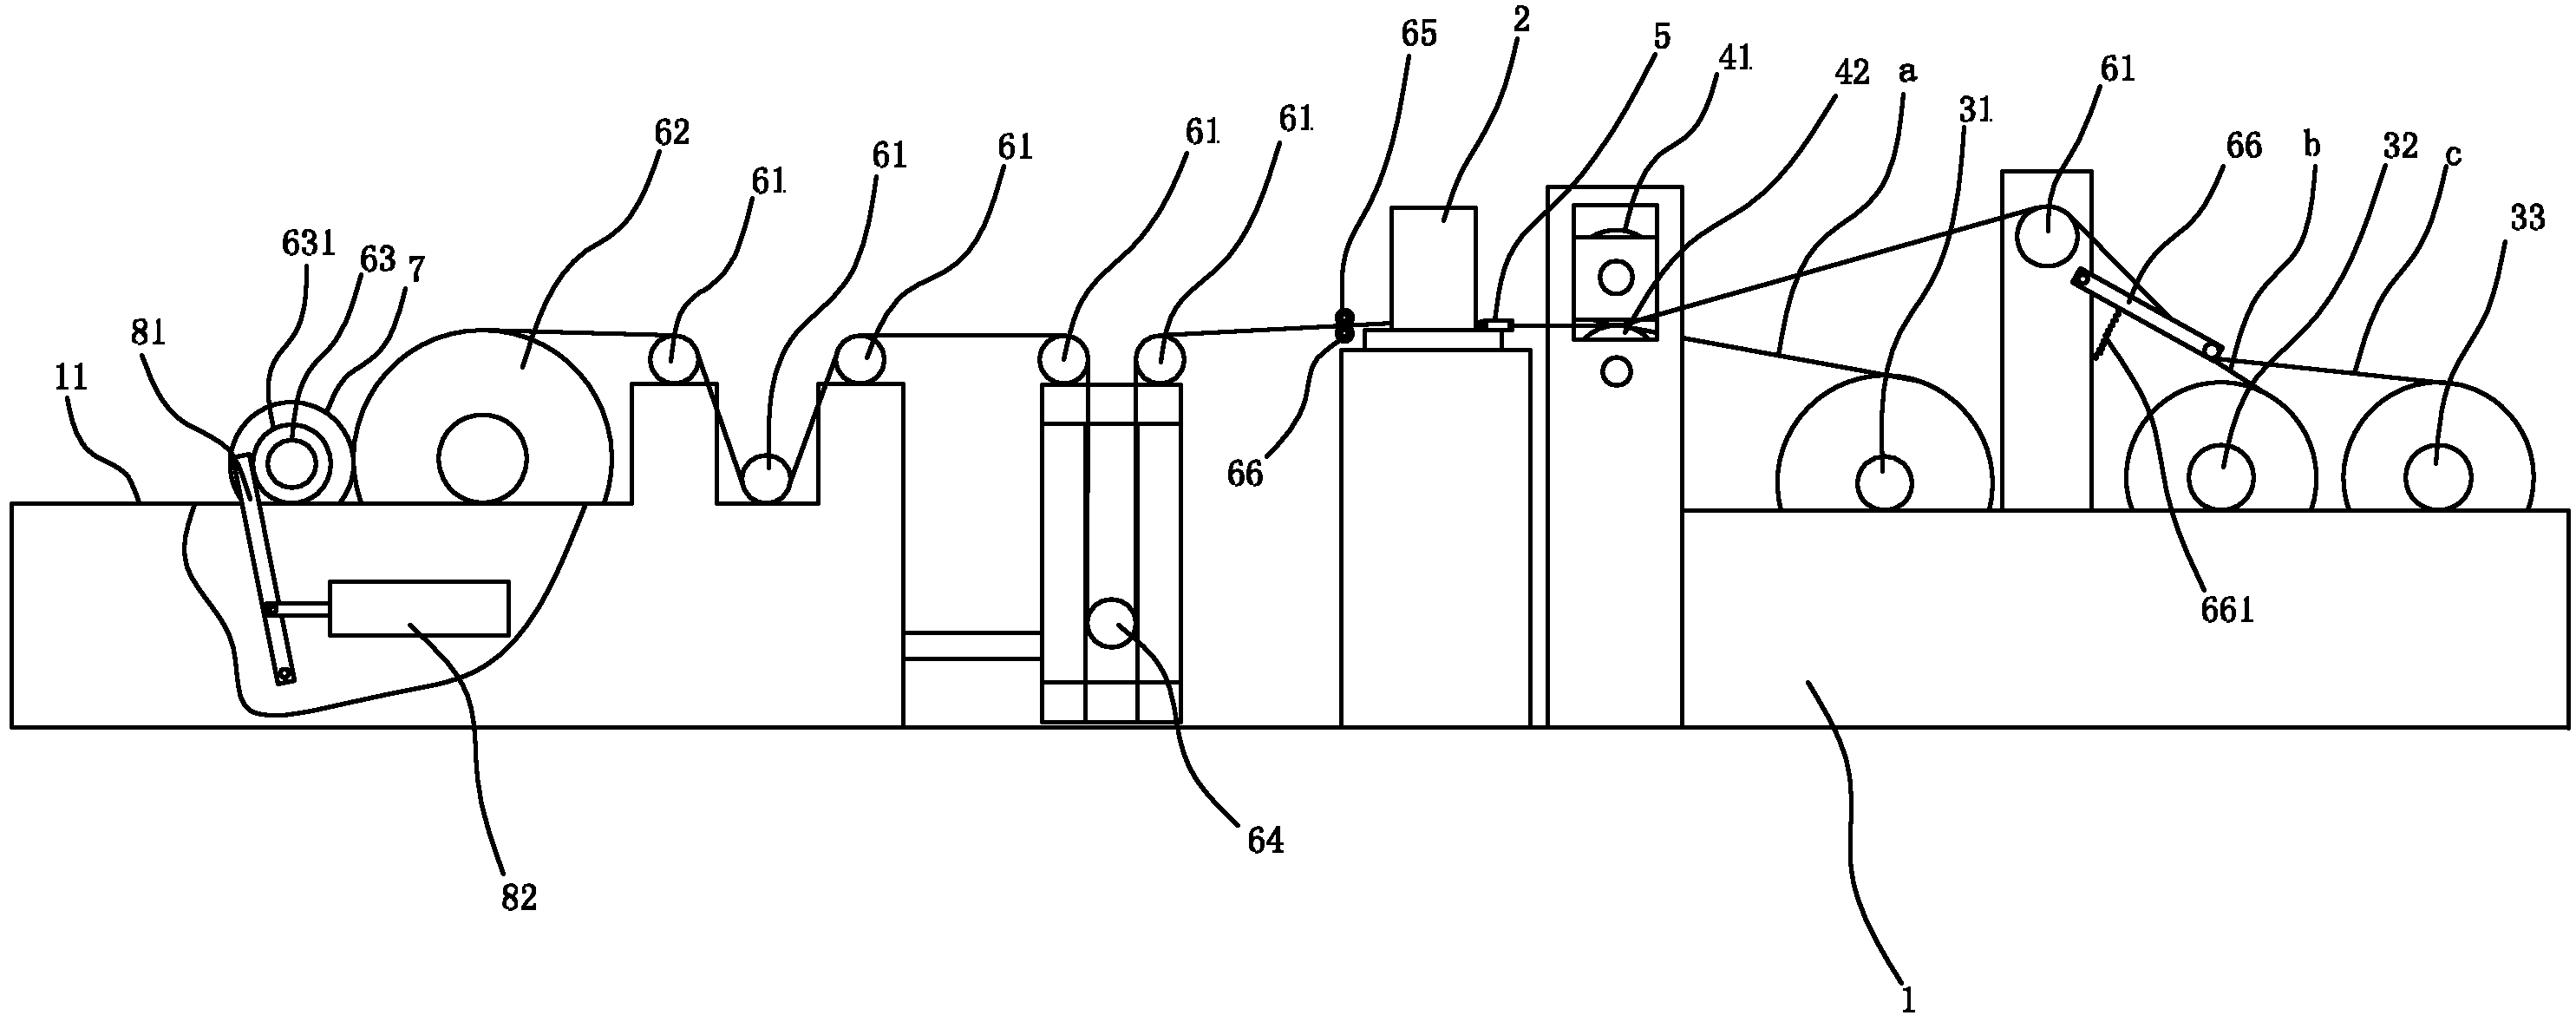 Continuous fabric strap sewing and edge-covering device